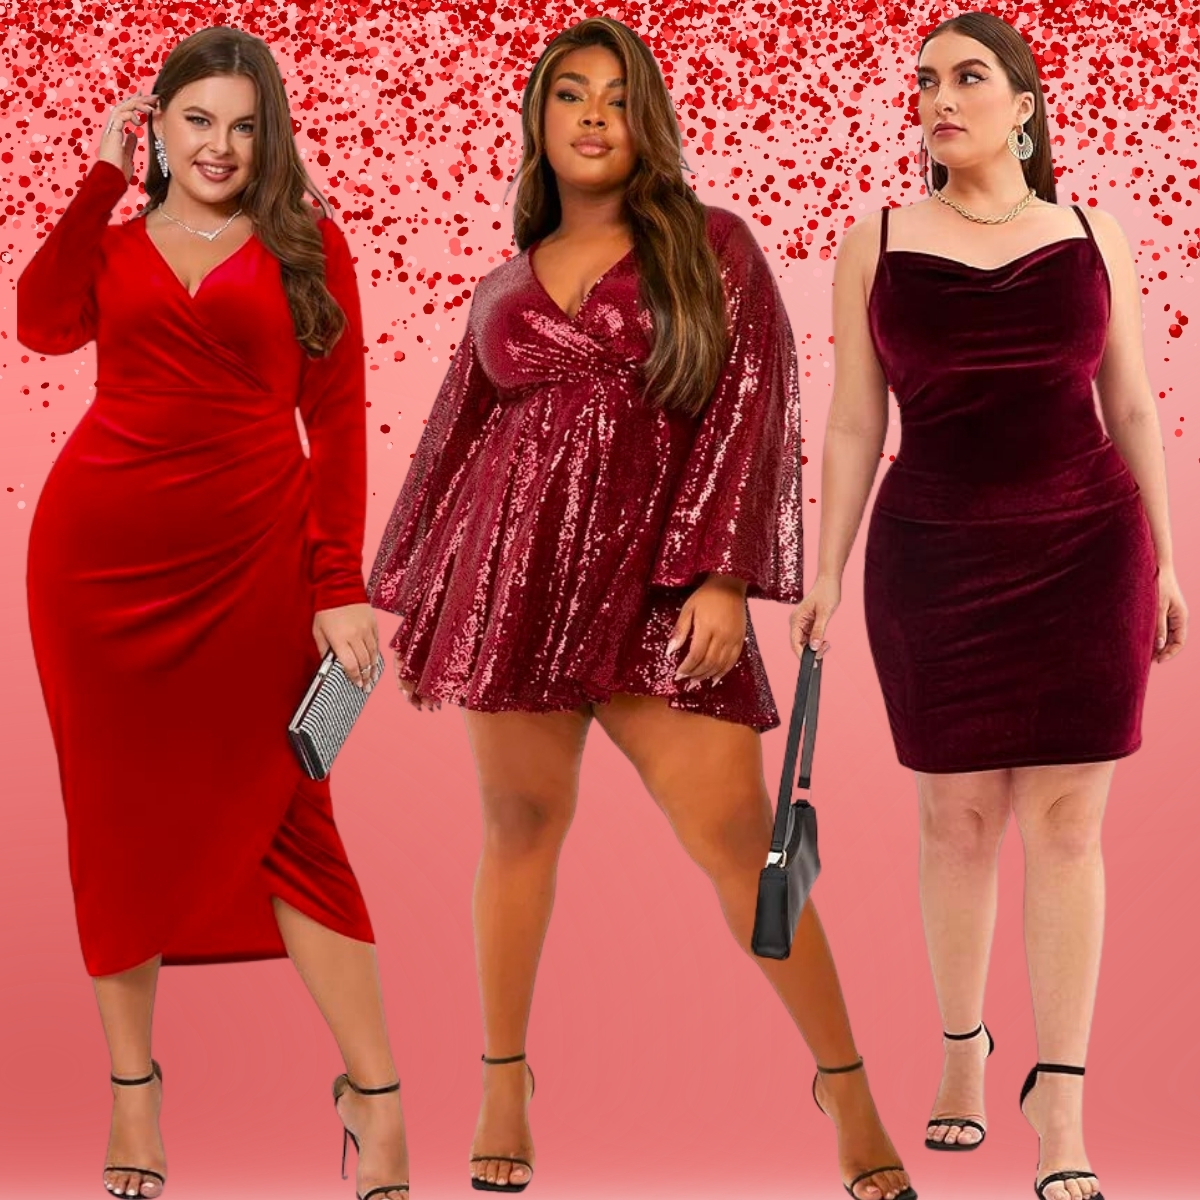 20 Really Fun New Year's Eve Plus Size Party Dress Ideas